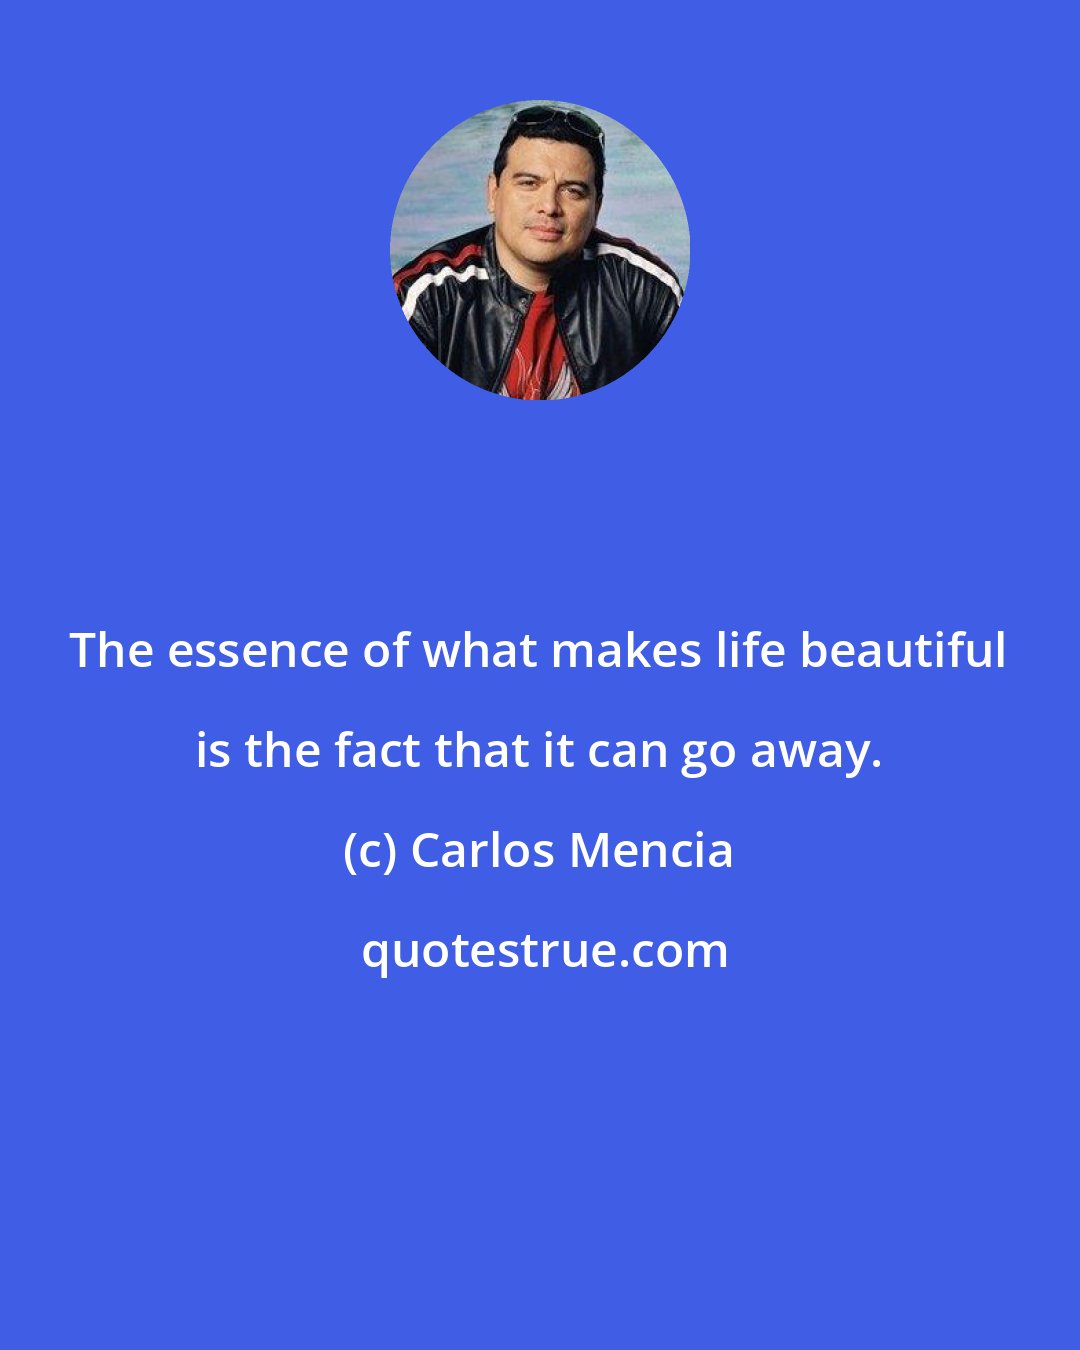 Carlos Mencia: The essence of what makes life beautiful is the fact that it can go away.